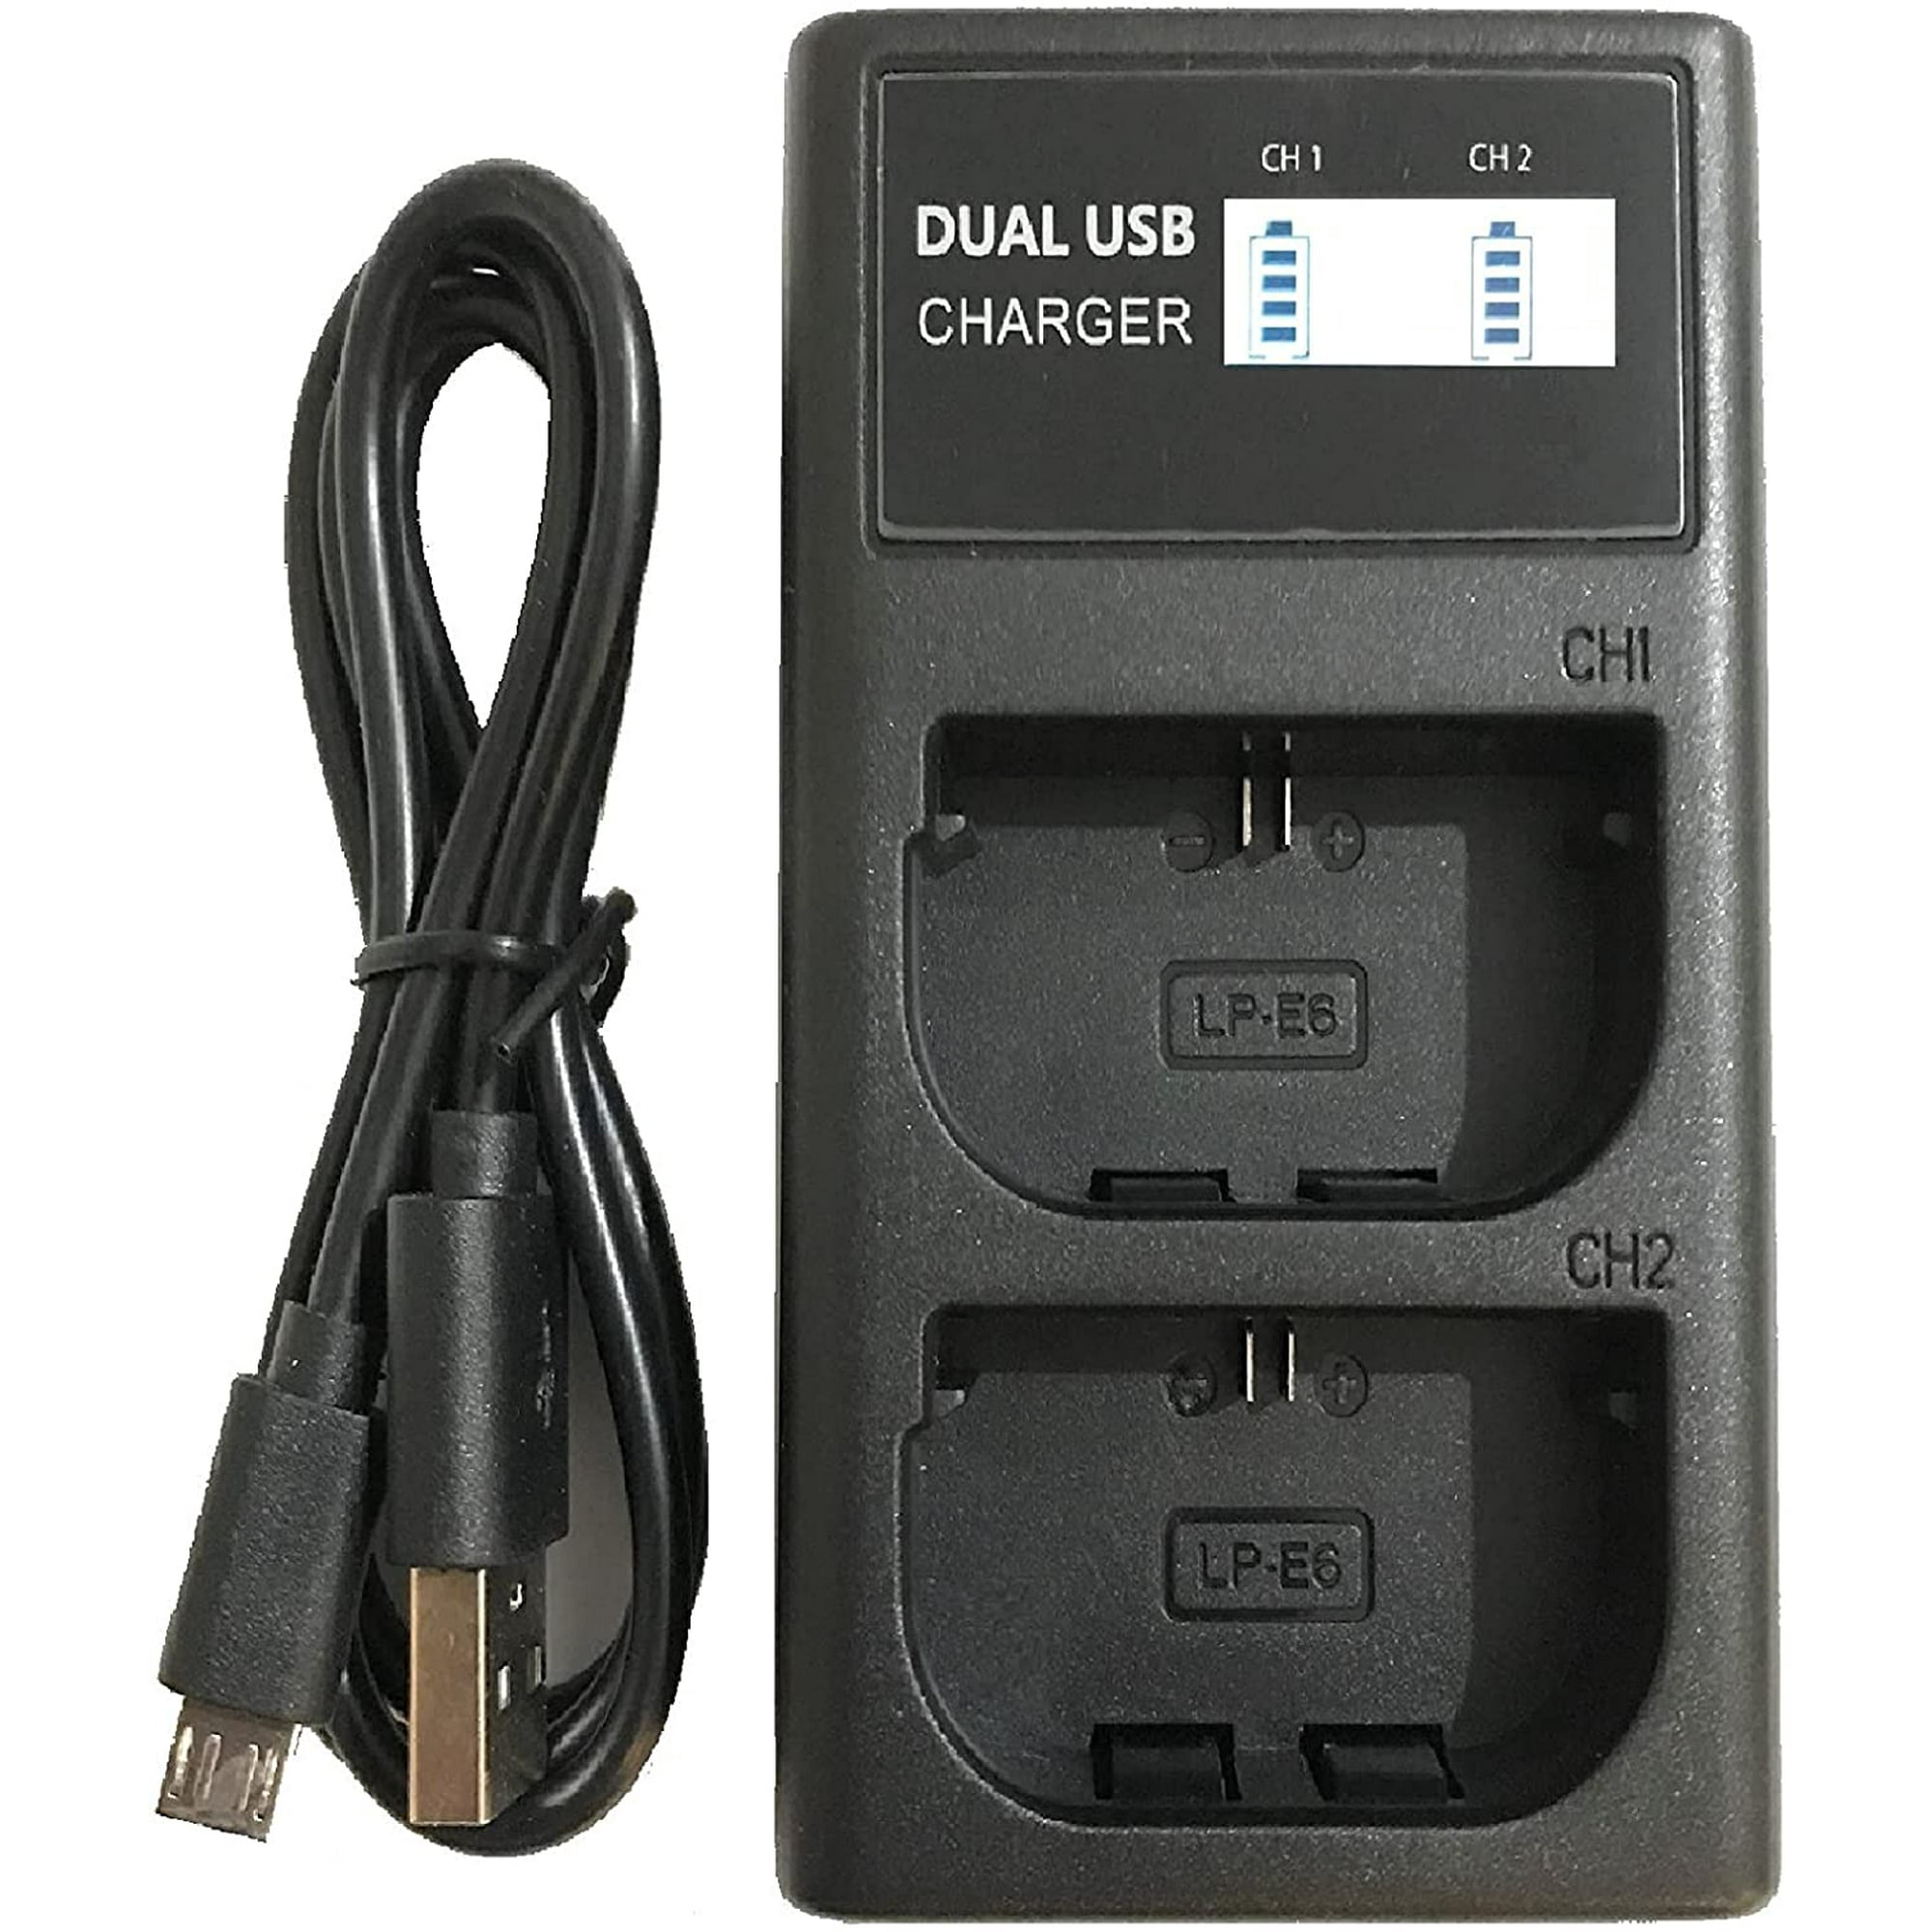 GD Living' Dual Digital y Charger for Canon LP-E6 / LP-E6N, LC-E6, CBC-E6,  LPE6, LCE6, CBCE6, EOS 5D Mark II, | Walmart Canada